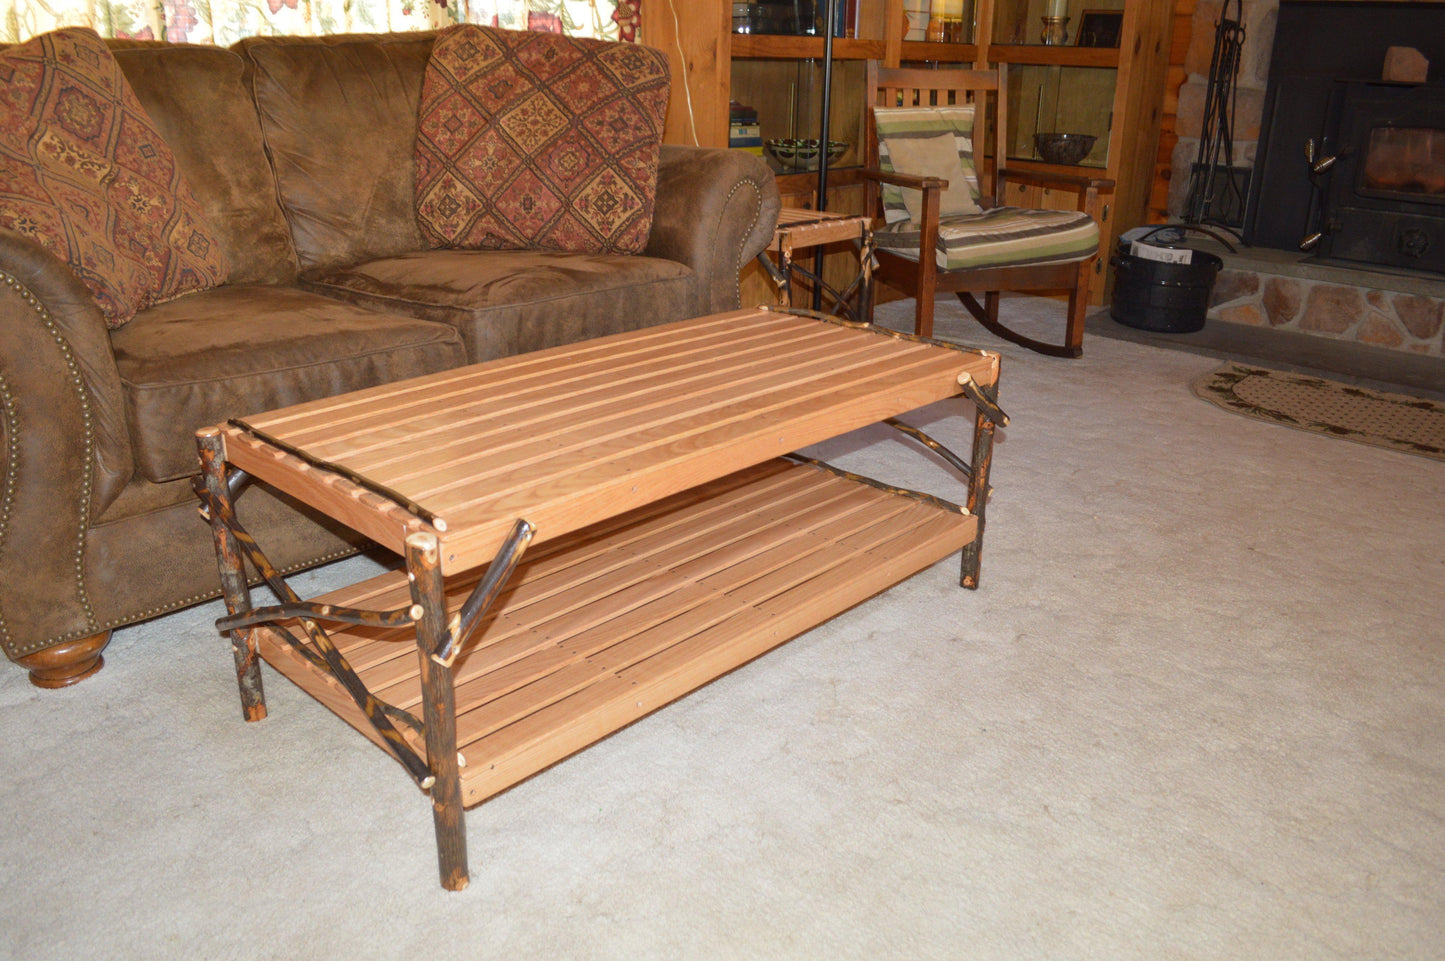 A&L Furniture Co. Amish Hickory Coffee Table with Shelf - LEAD TIME TO SHIP 4 WEEKS OR LESS